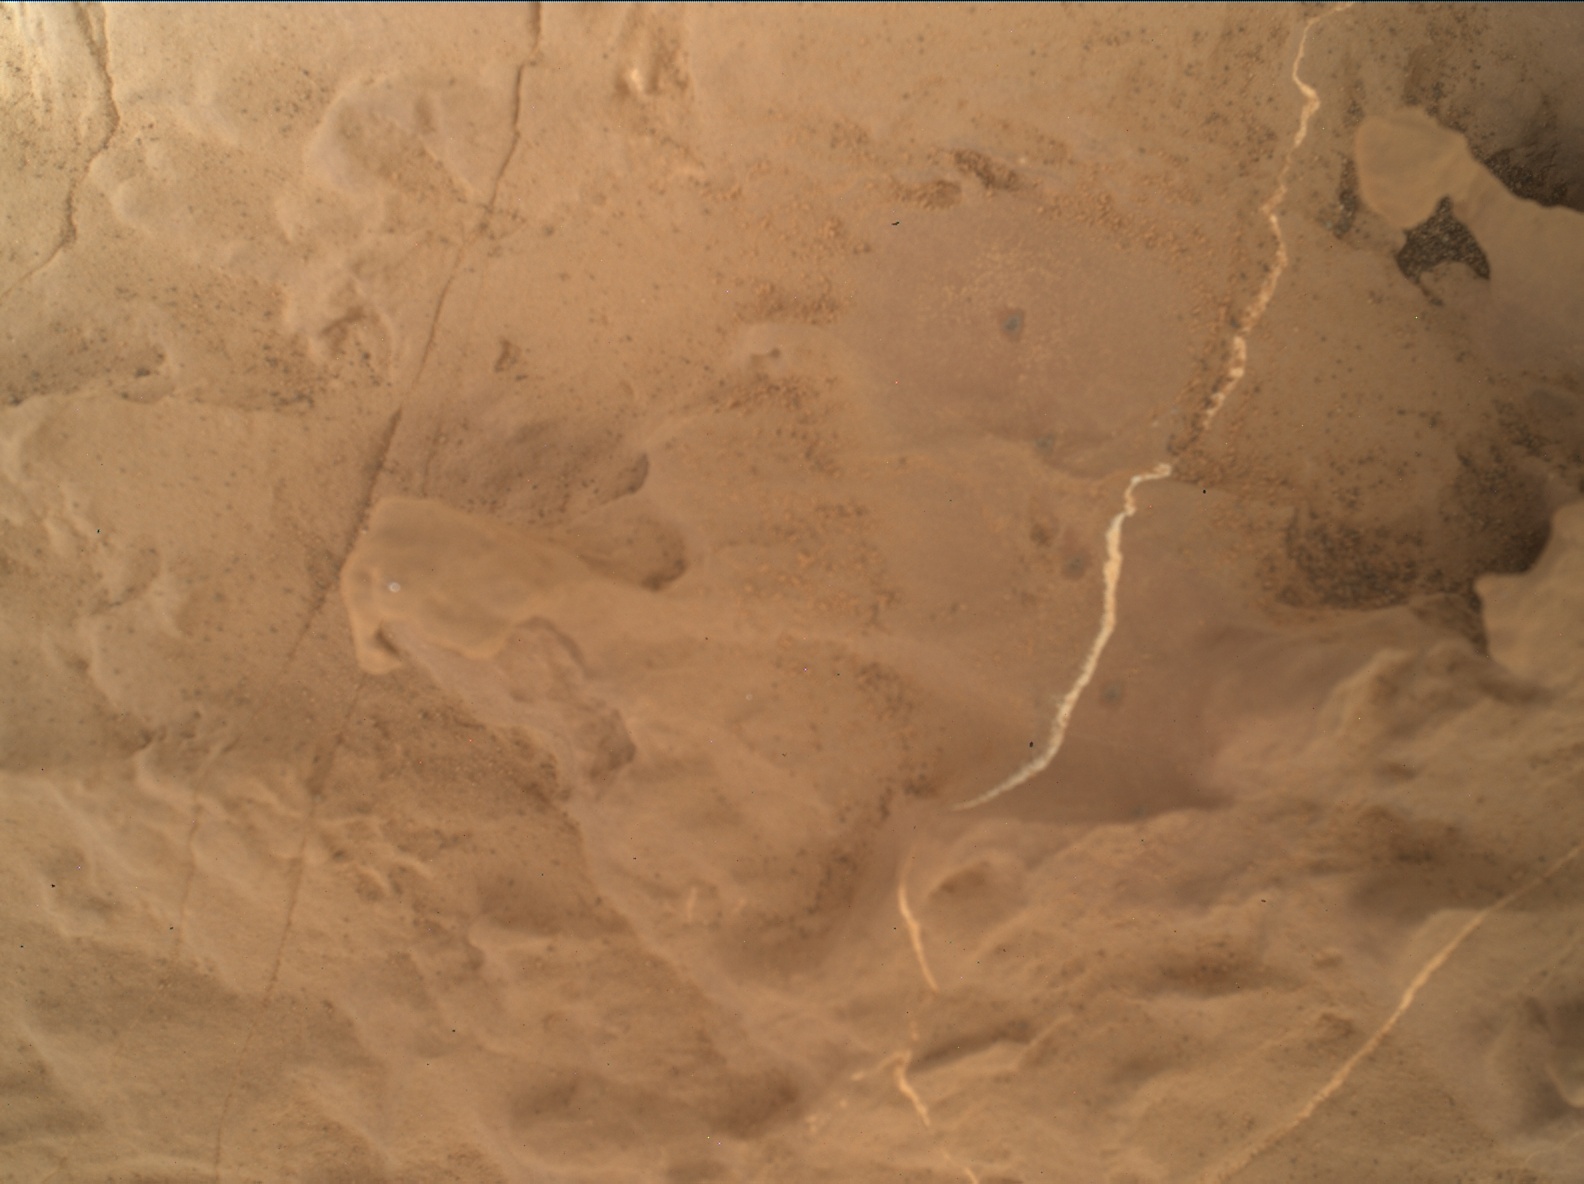 Nasa's Mars rover Curiosity acquired this image using its Mars Hand Lens Imager (MAHLI) on Sol 1838